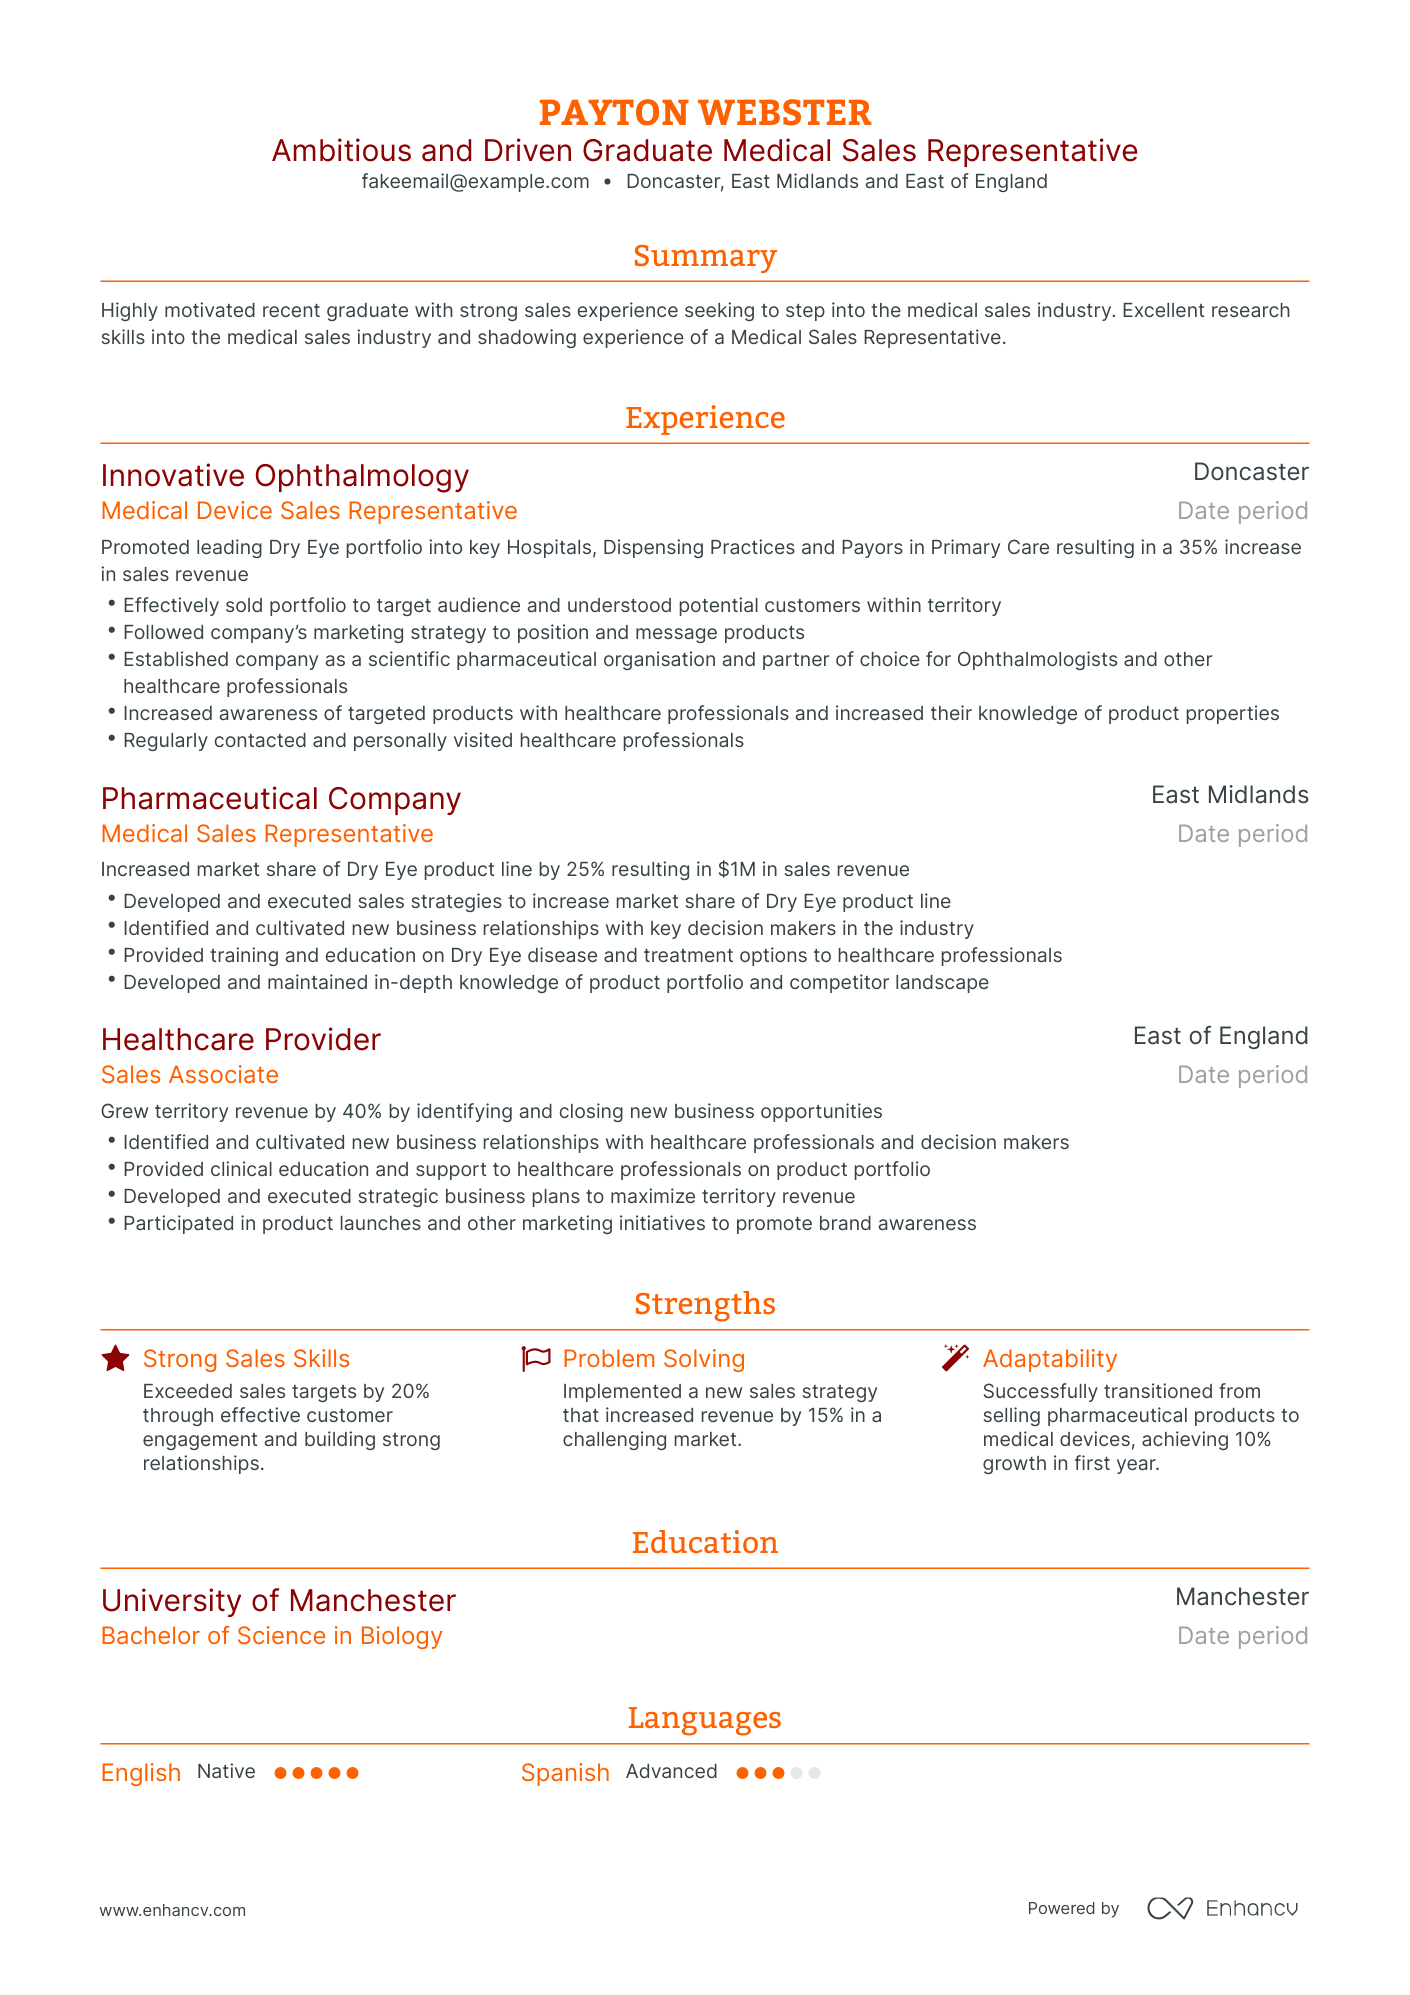 Traditional Medical Device Sales Representative Resume Template